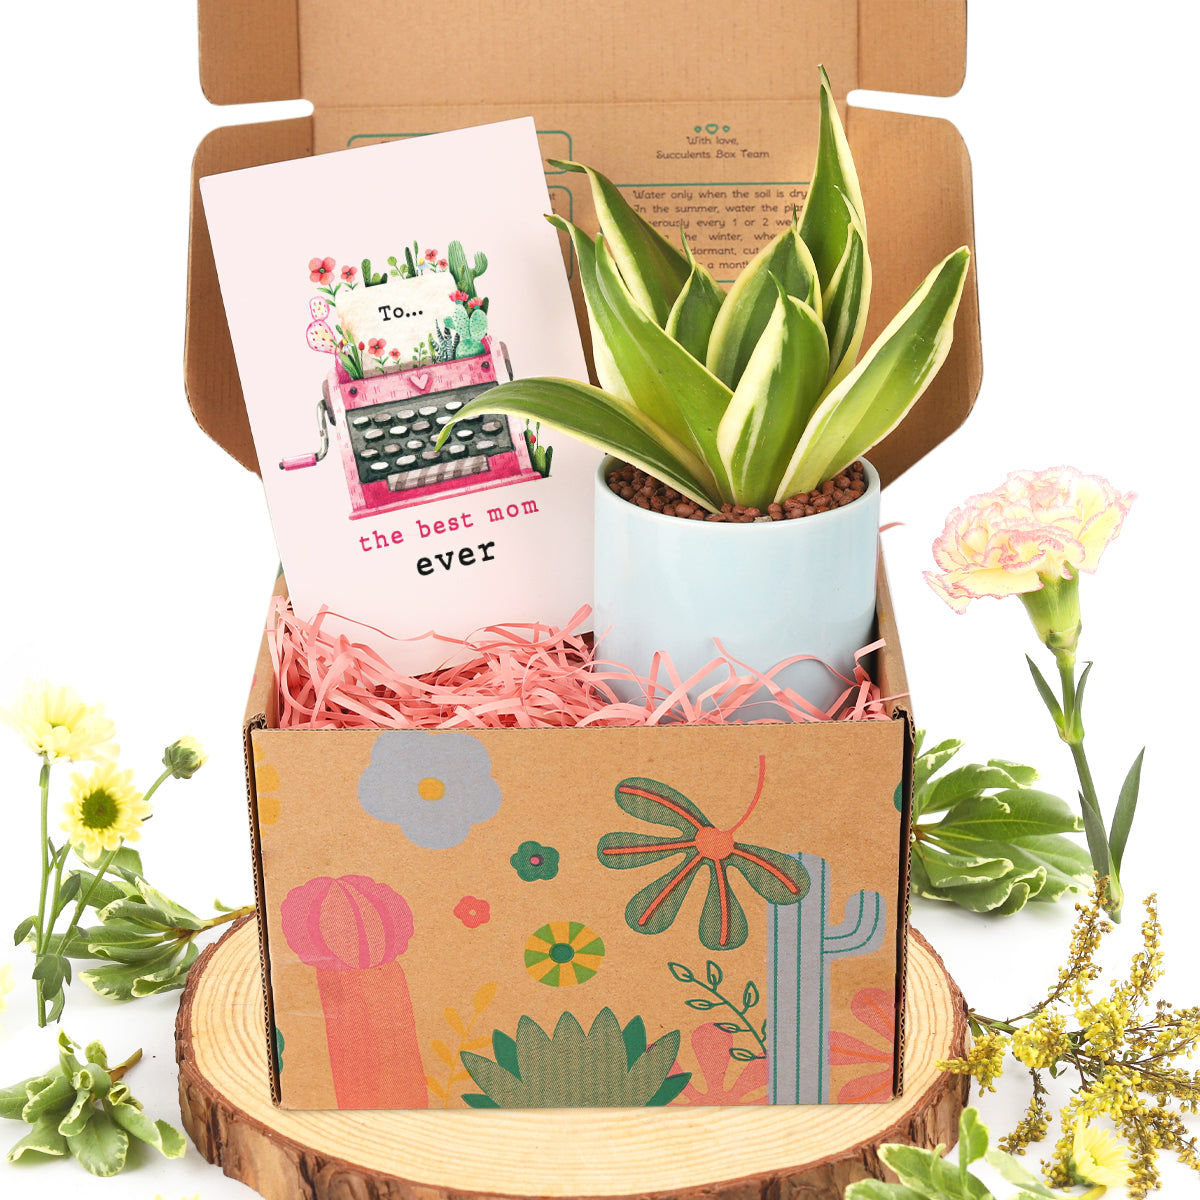 Best ever mom card, Mother's card gift ideas, Buy houseplant gift box online, Live plant gift for mom